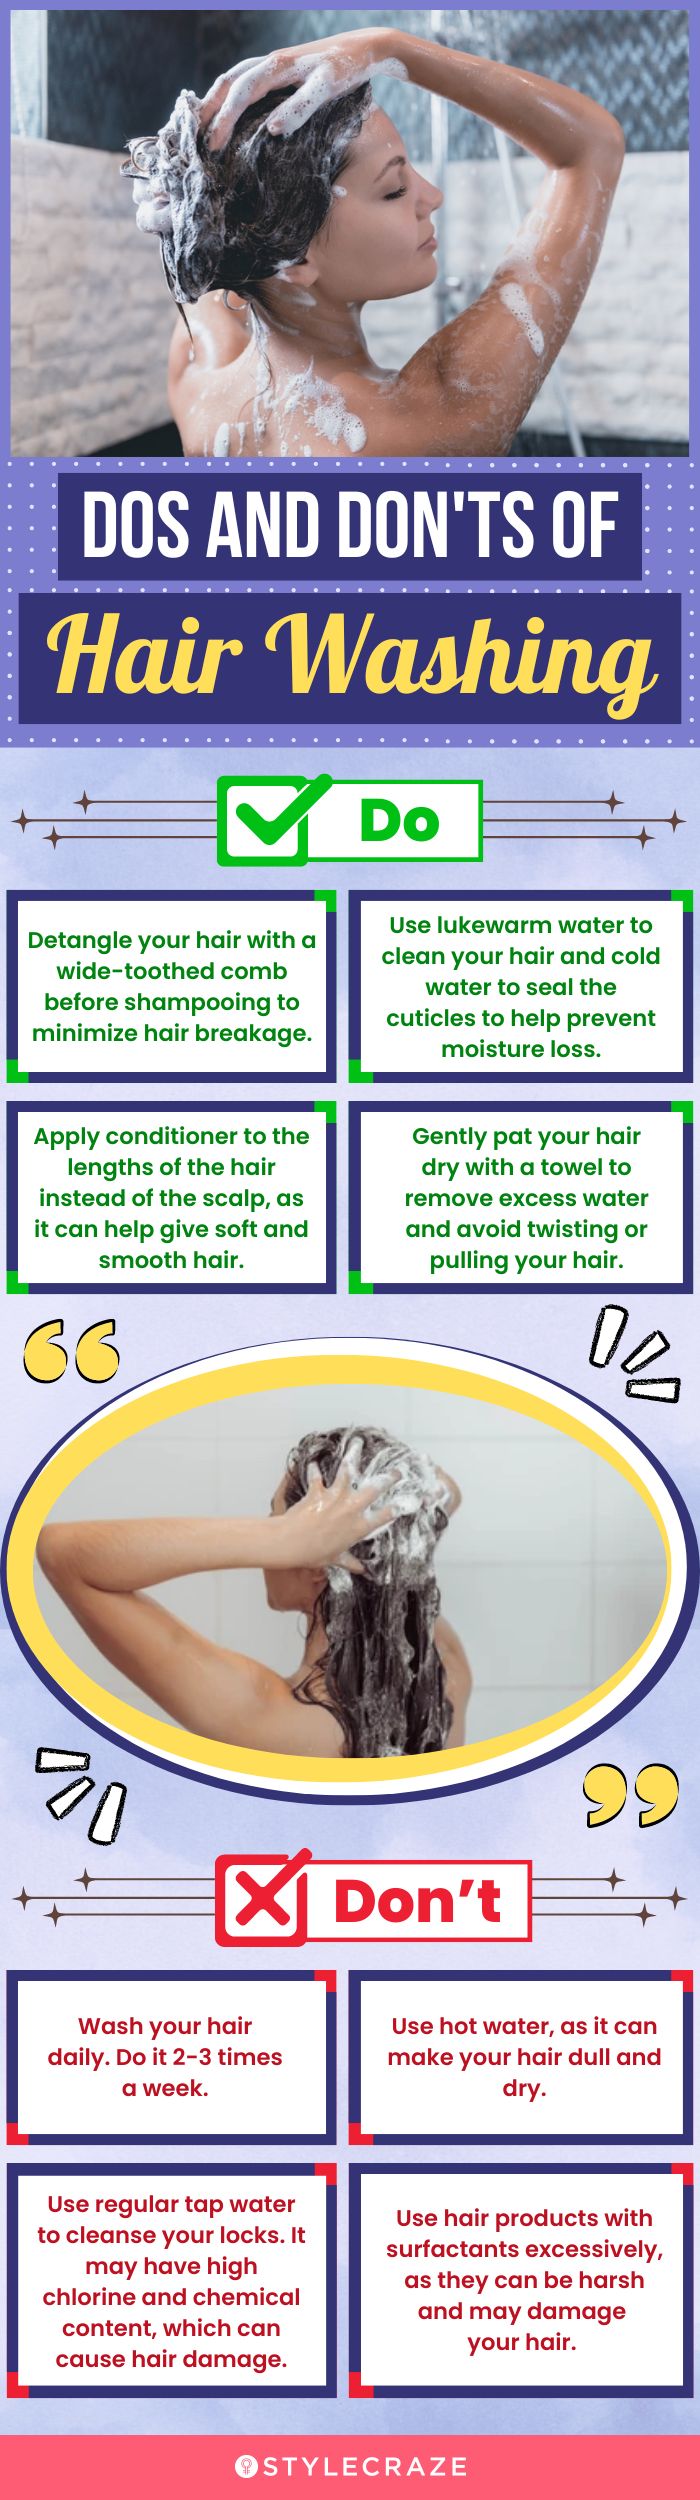 dos and don'ts of hair washing (infographic)